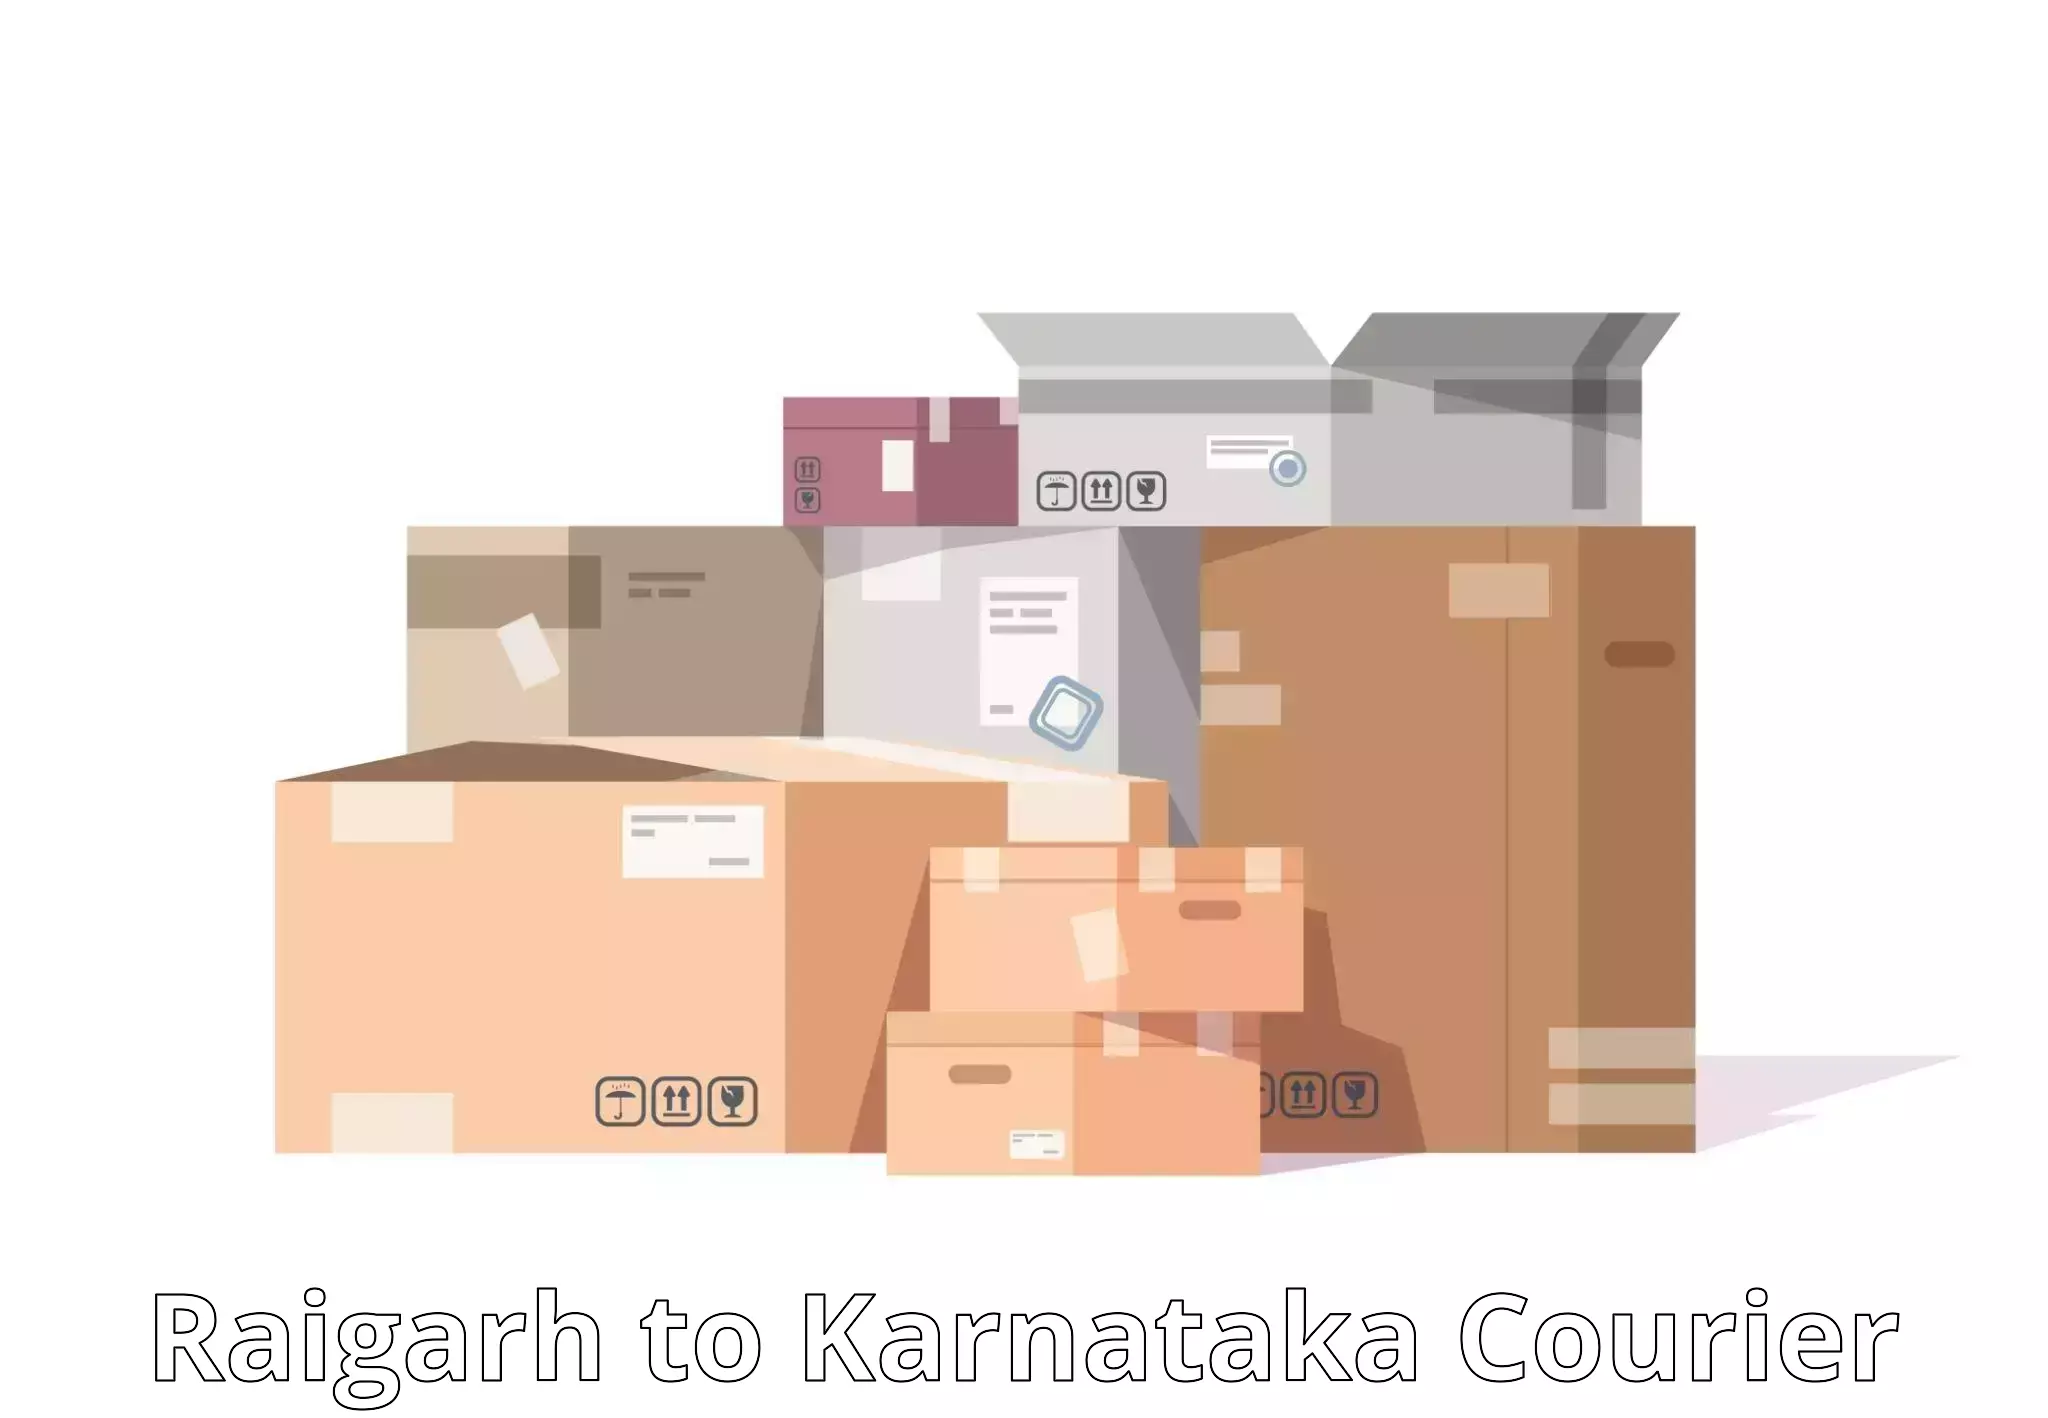 Courier service efficiency Raigarh to Mangalore Port